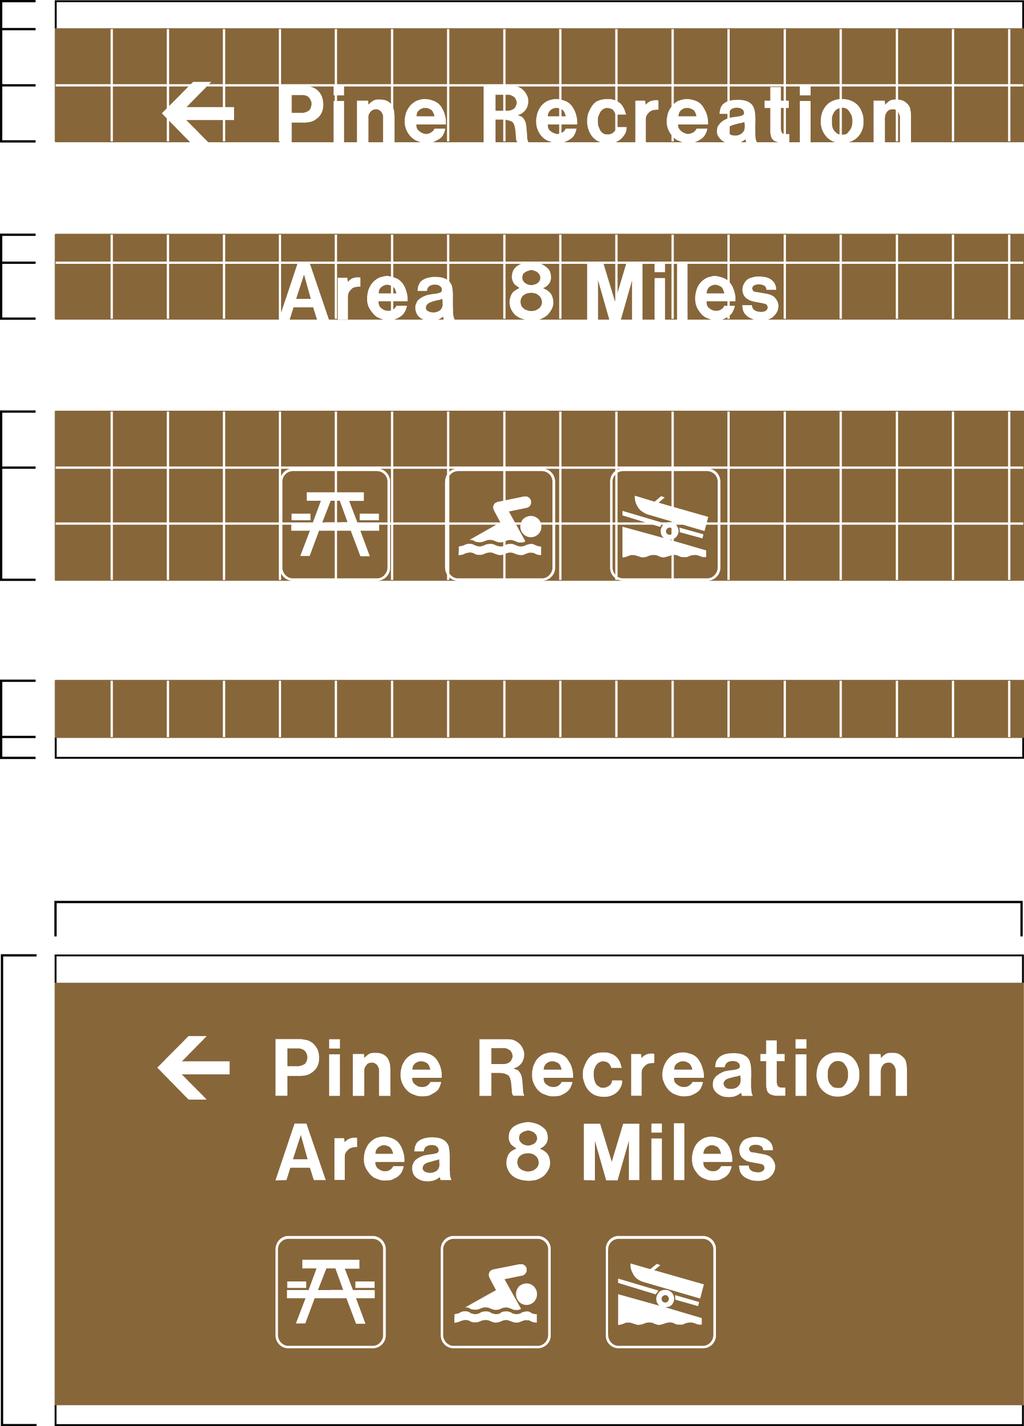 EP 310-1-6a Directional Sign with Three Symbols Two formats, one shown below and one on the following page, are provided for placing symbols indicating services on an pproach Roadway Directional sign.